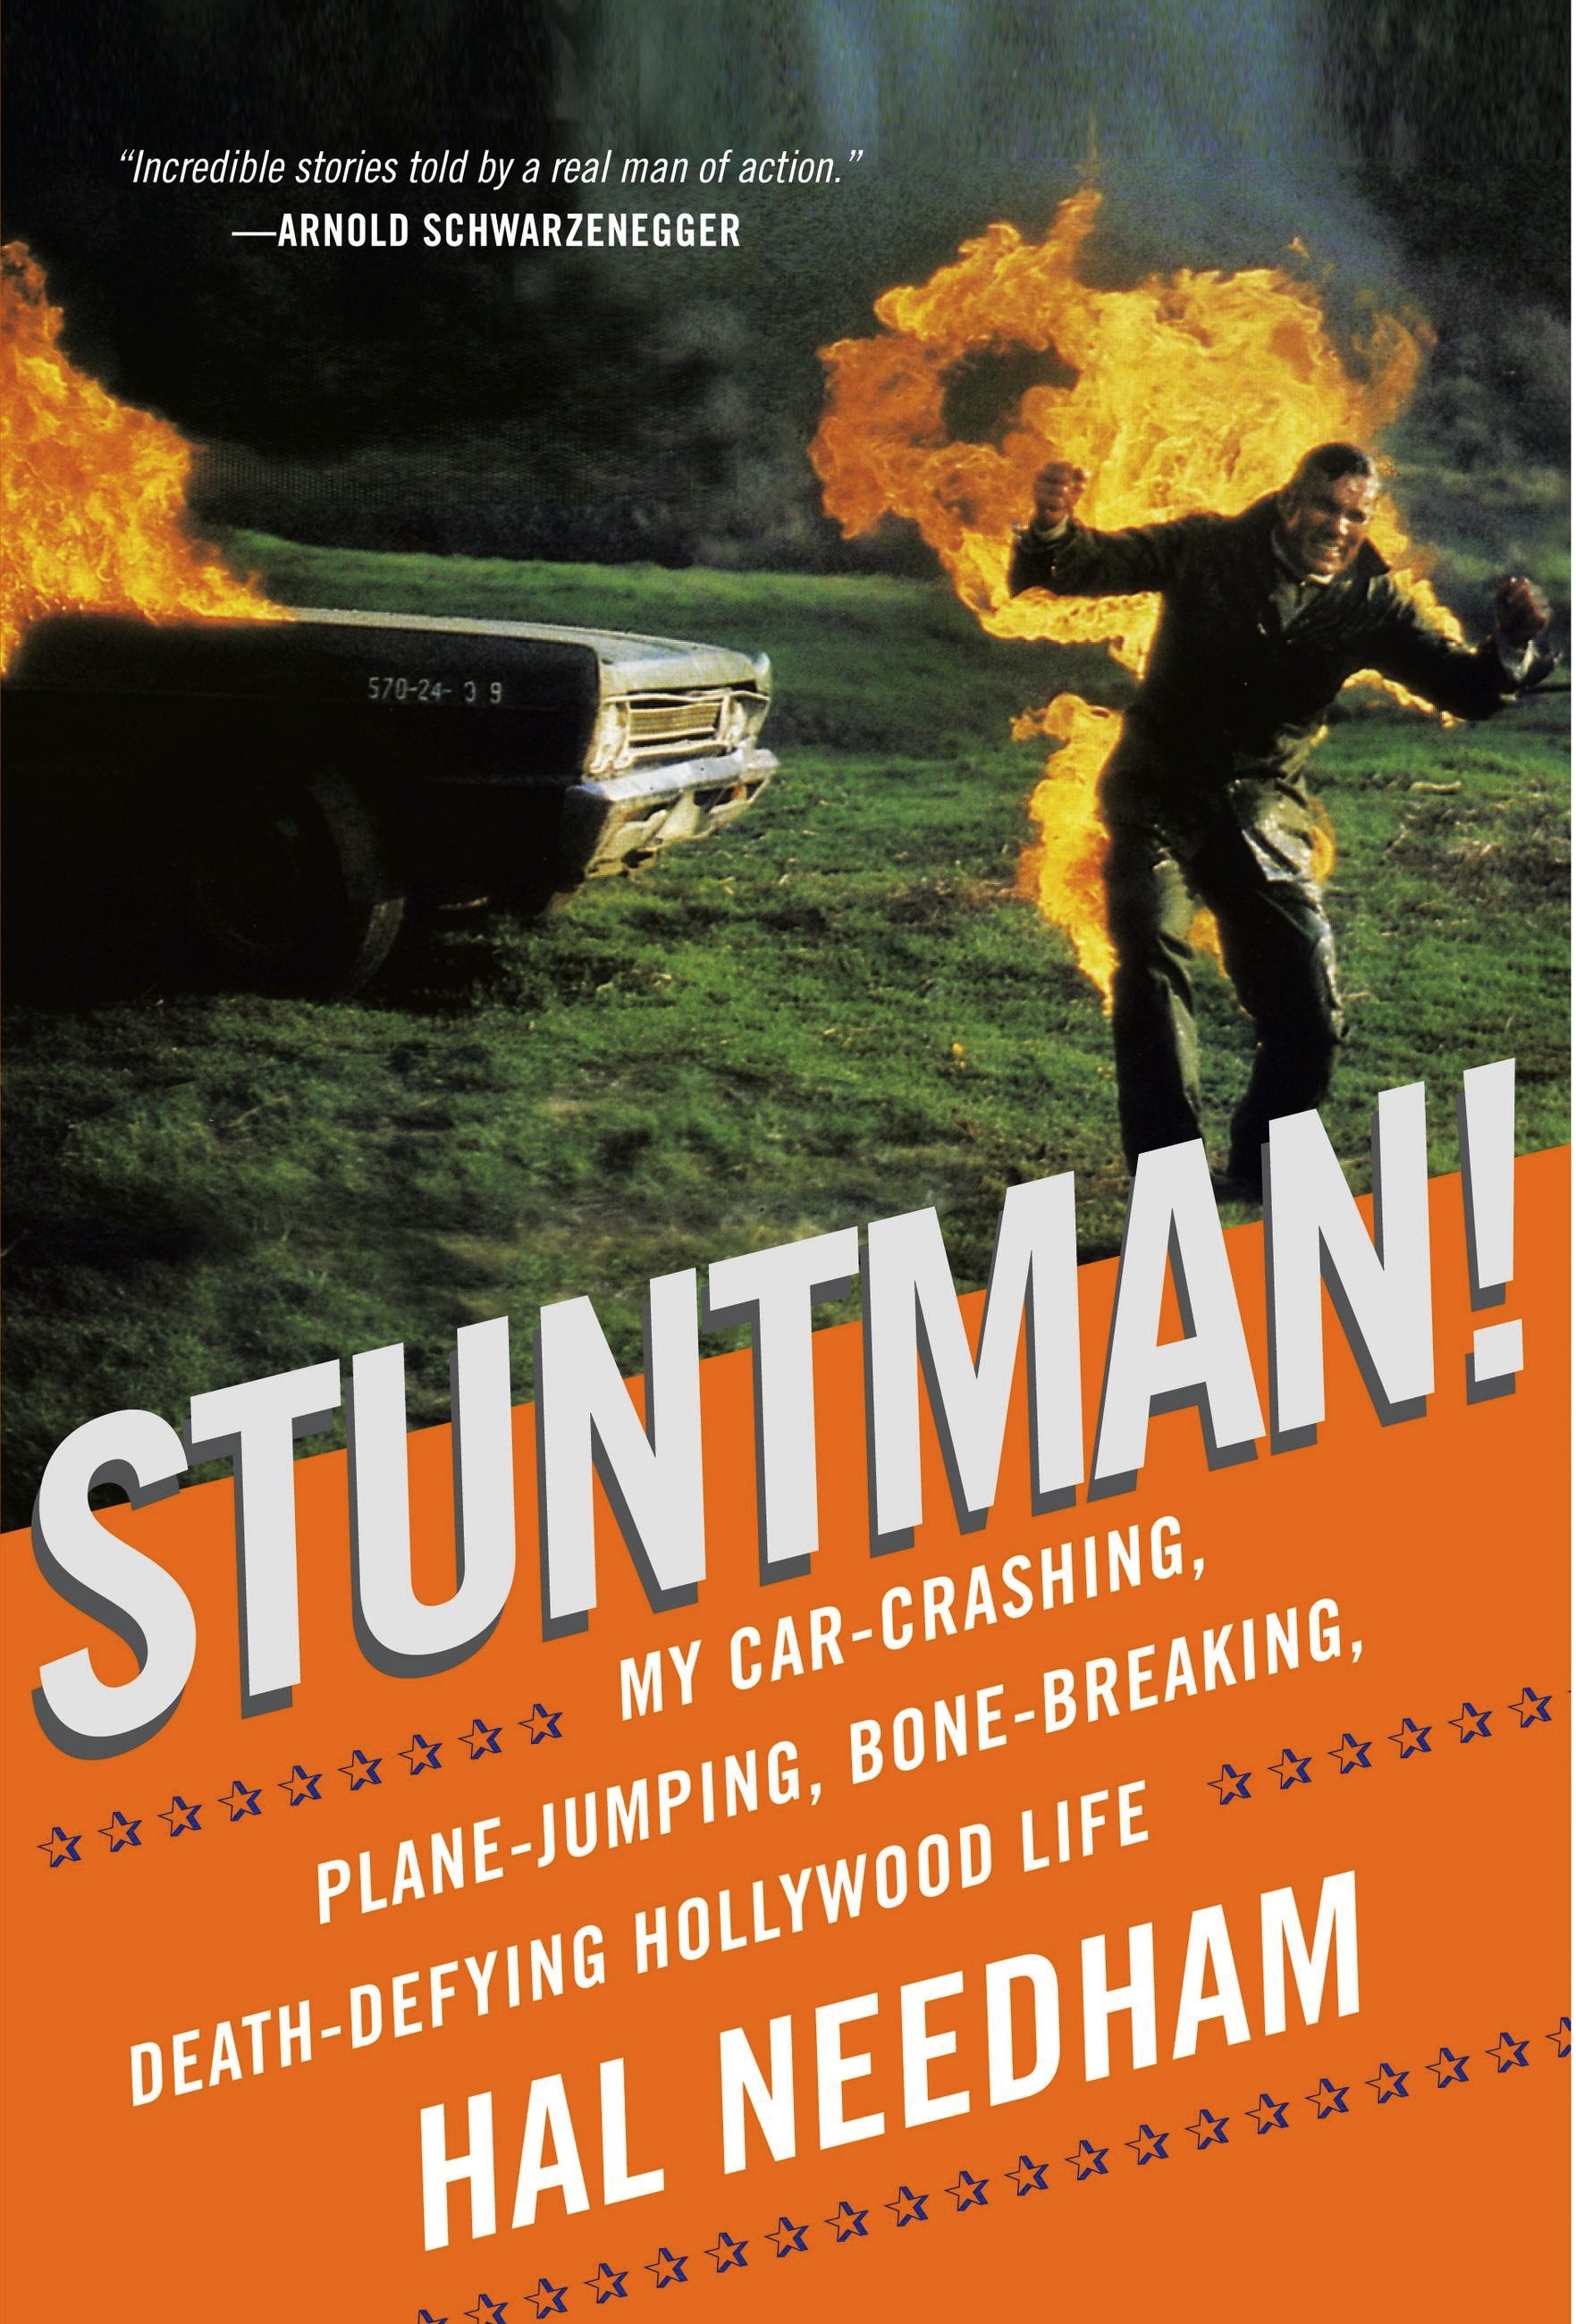 Is Hollywood Stuntman Cliff Booth Based On Real Person?